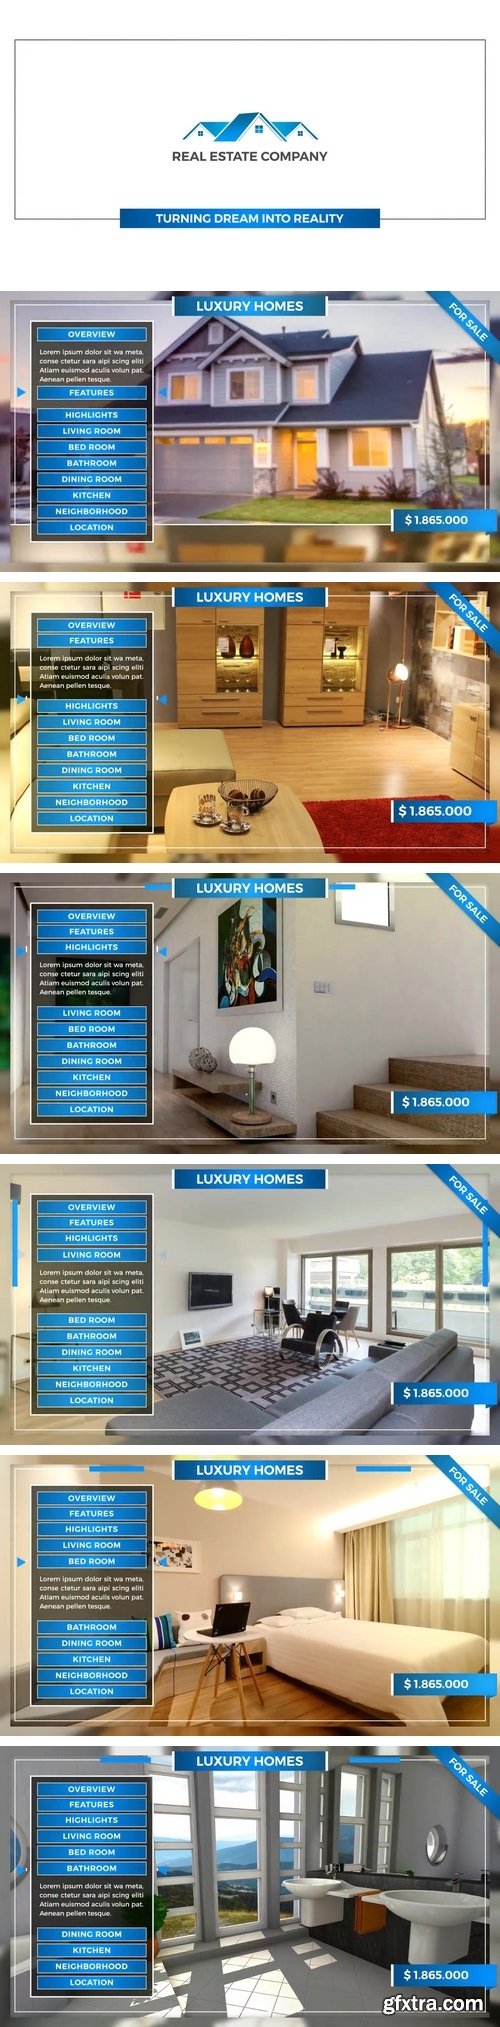 MotionArray - Real Estate Slideshow After Effects Templates 58600